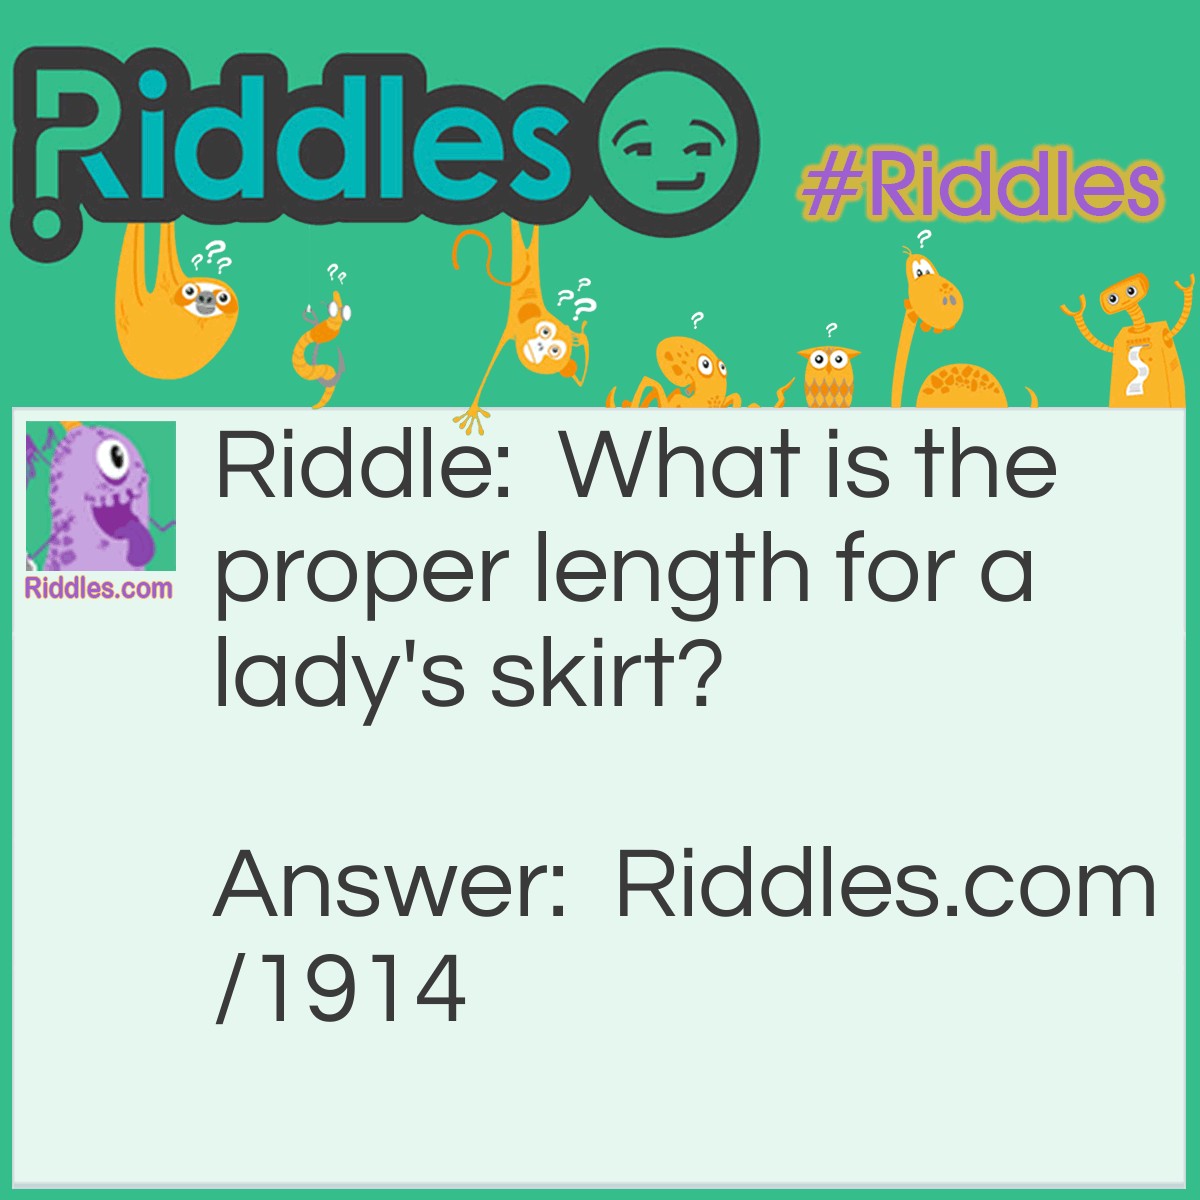 Riddle: What is the proper length for a lady's skirt? Answer: A little above two feet.